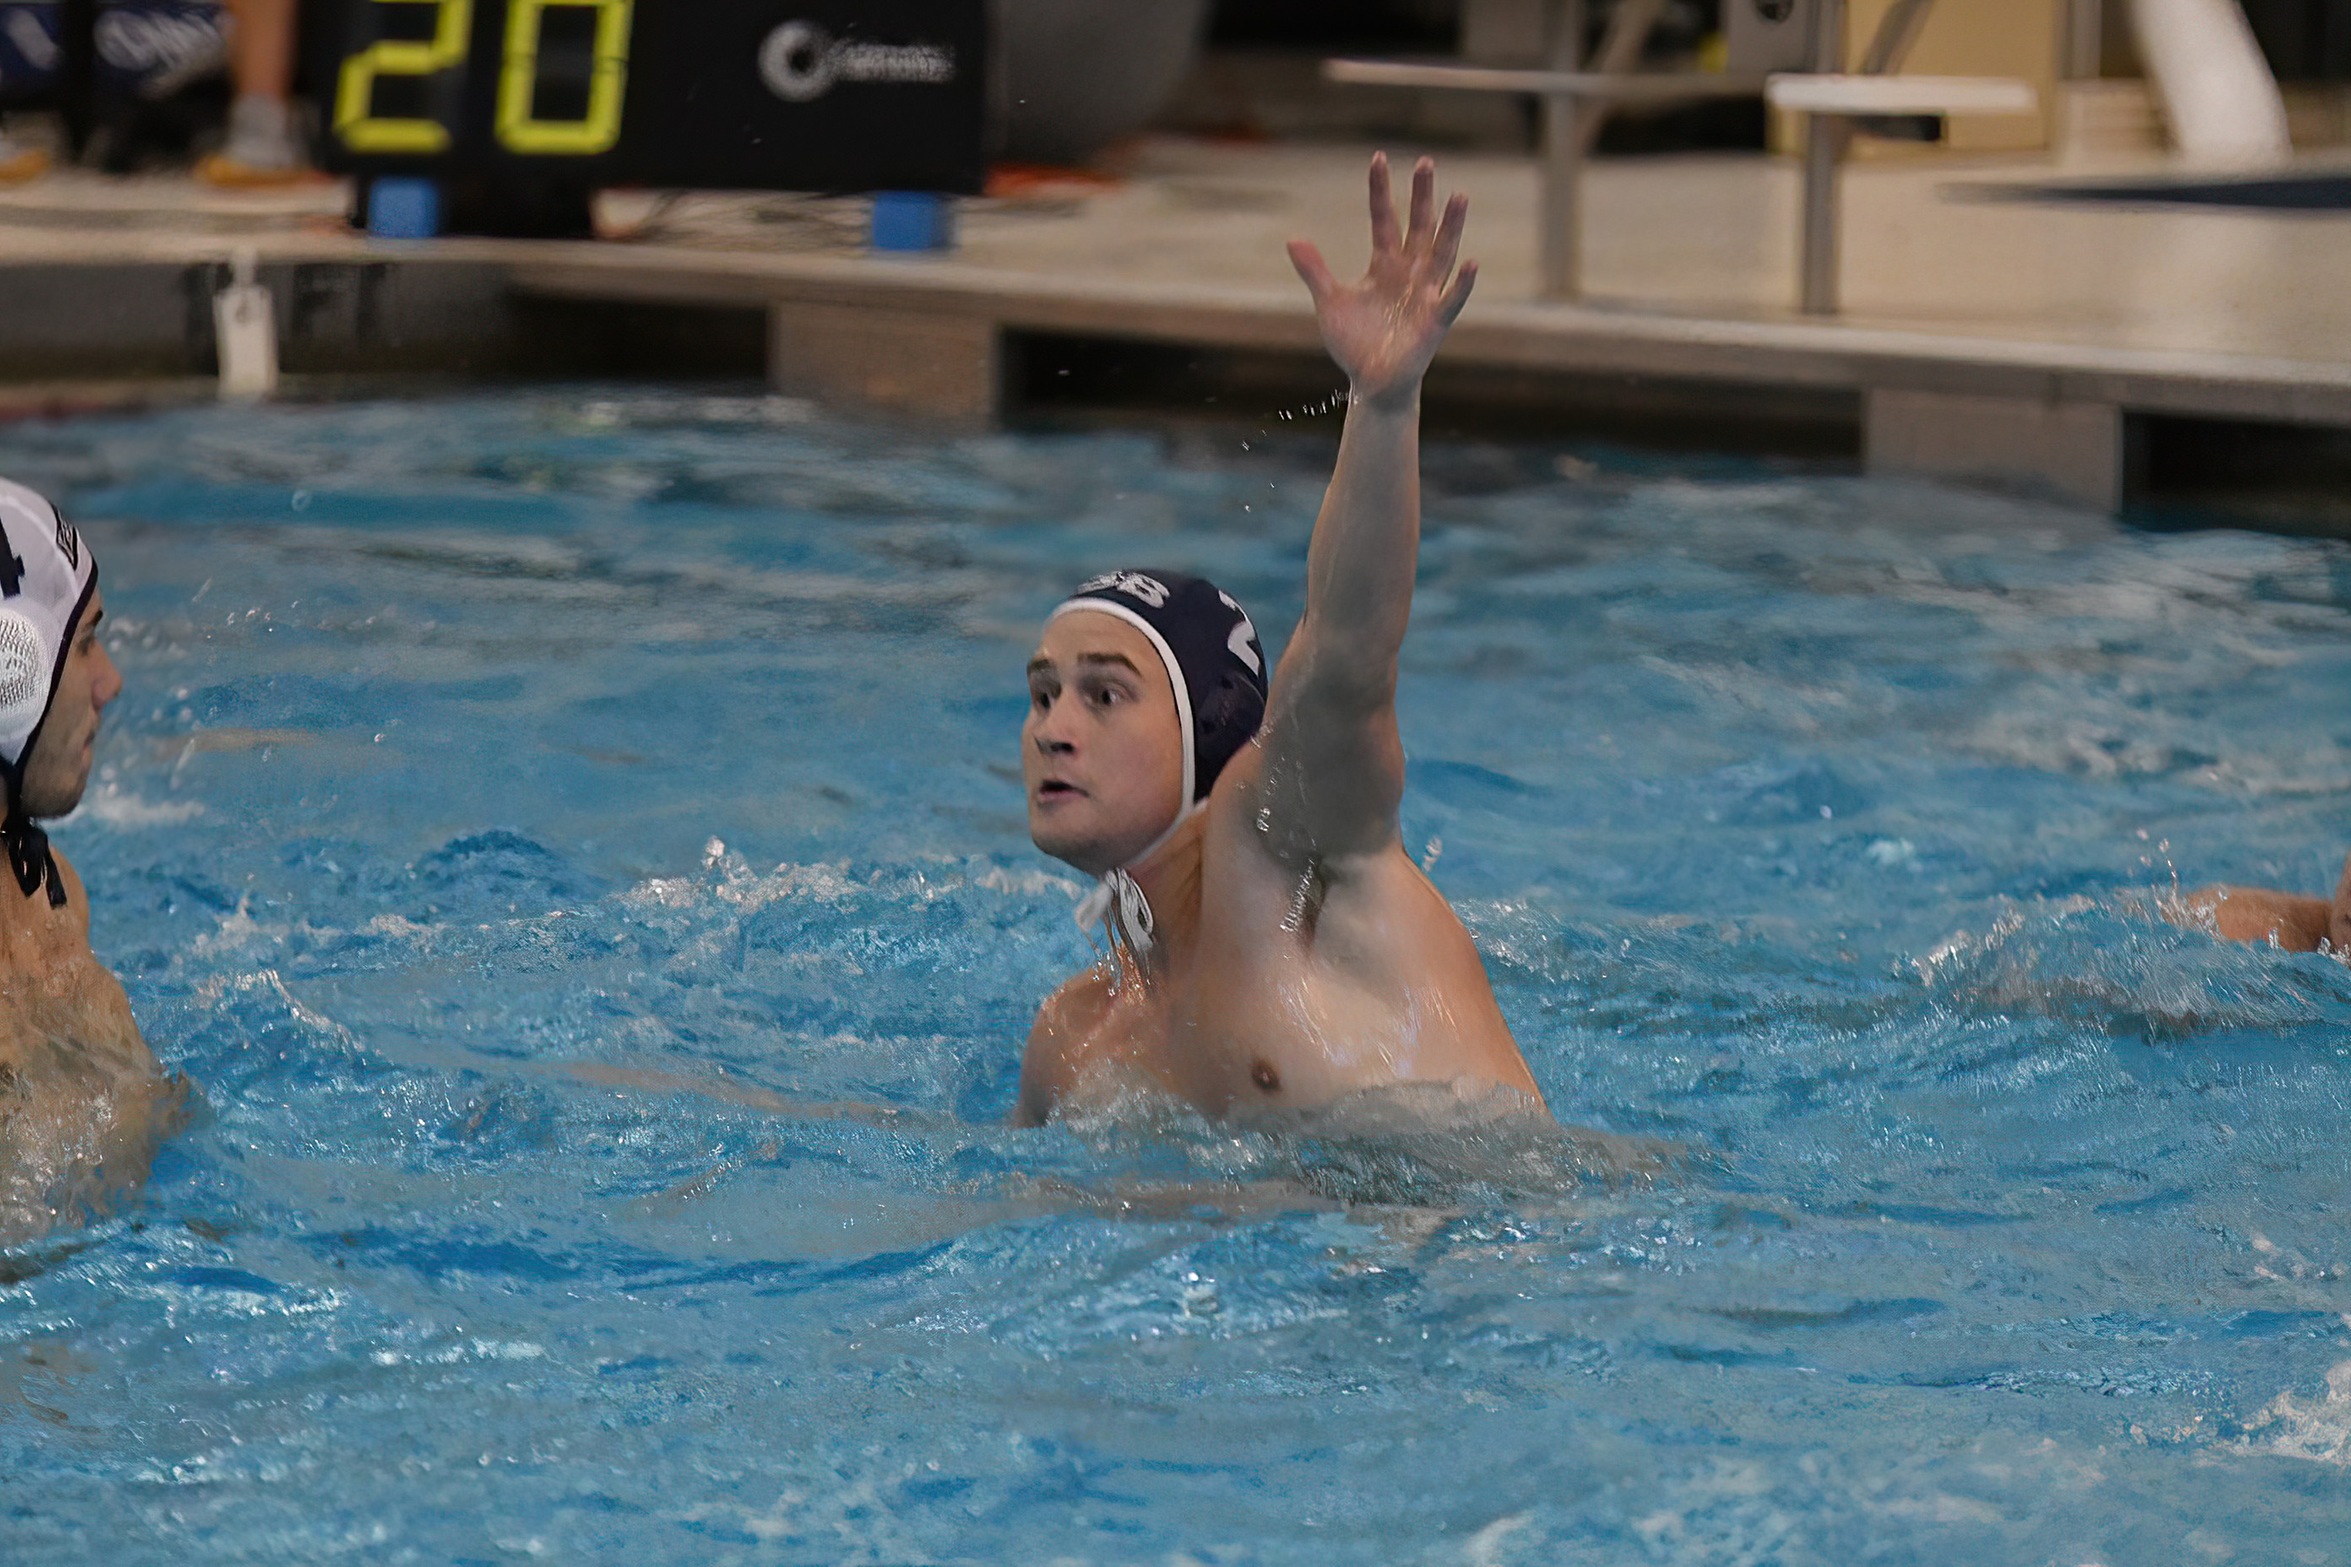 Holl Scores Five Goals; Men's Water Polo Falls to Mount St. Mary's